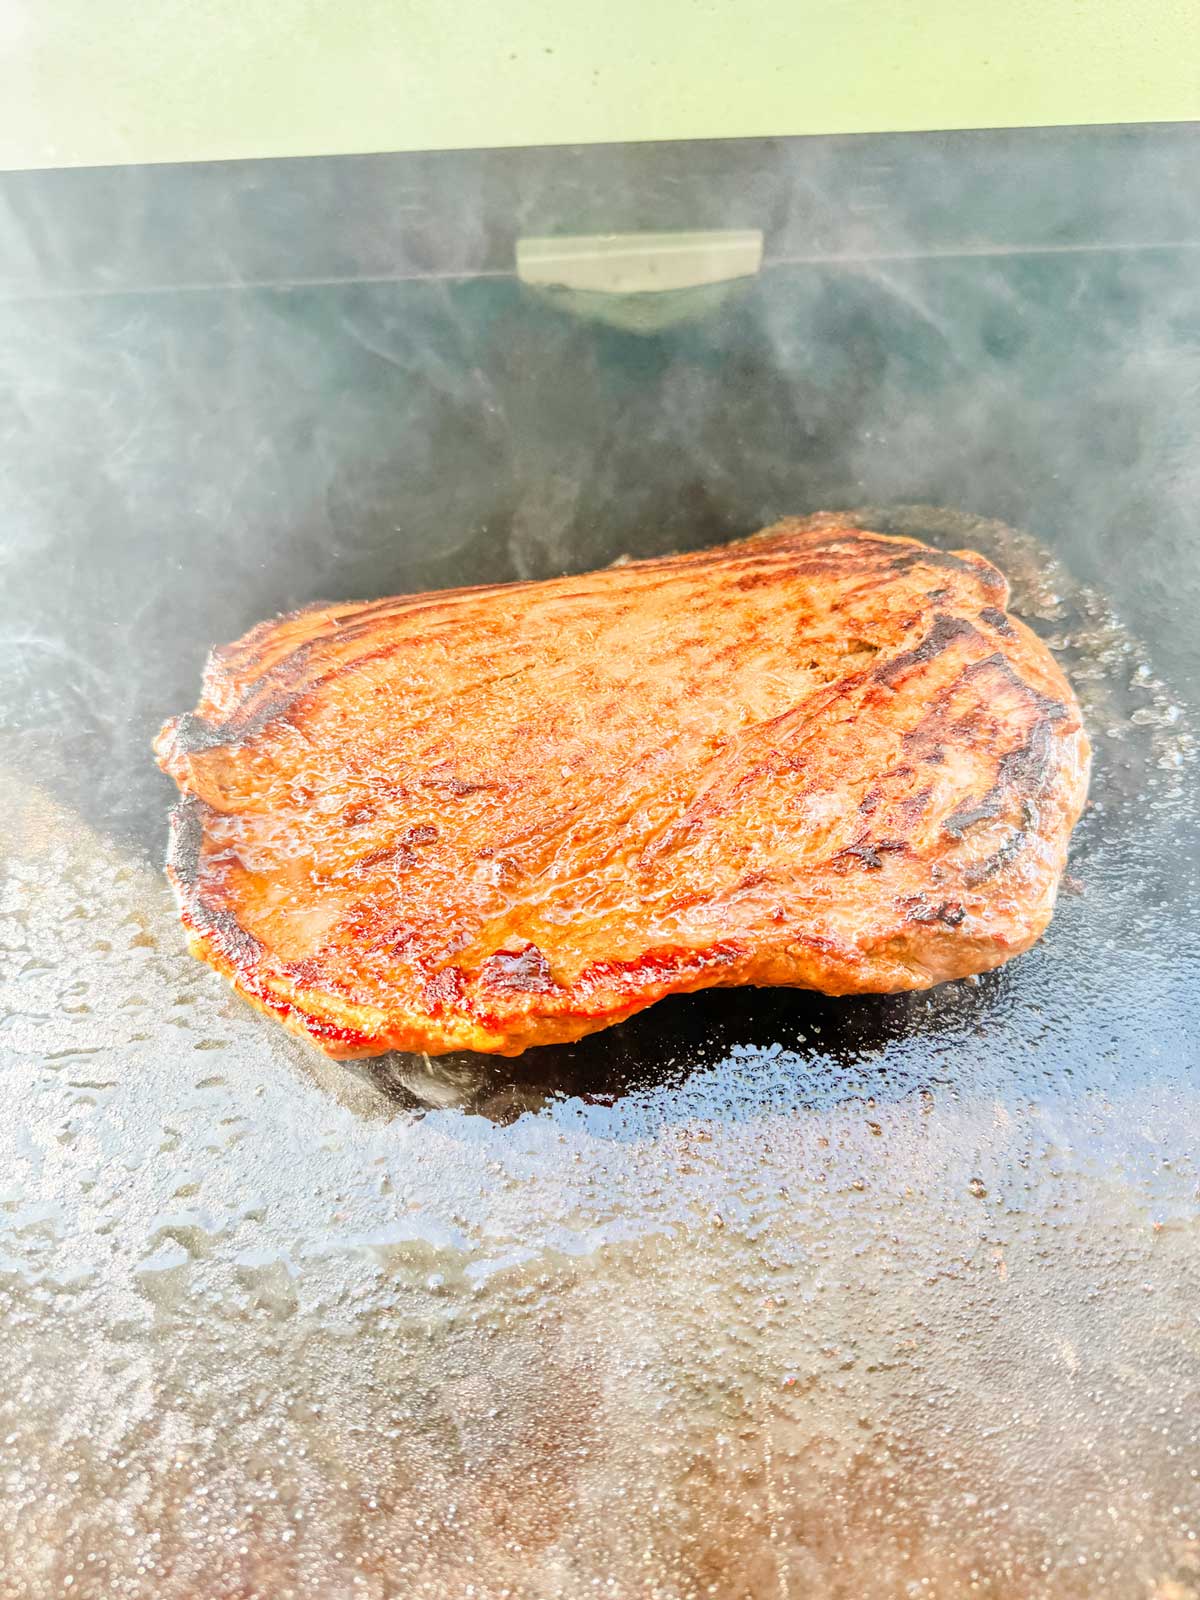 Flank steak cooking on a griddle.